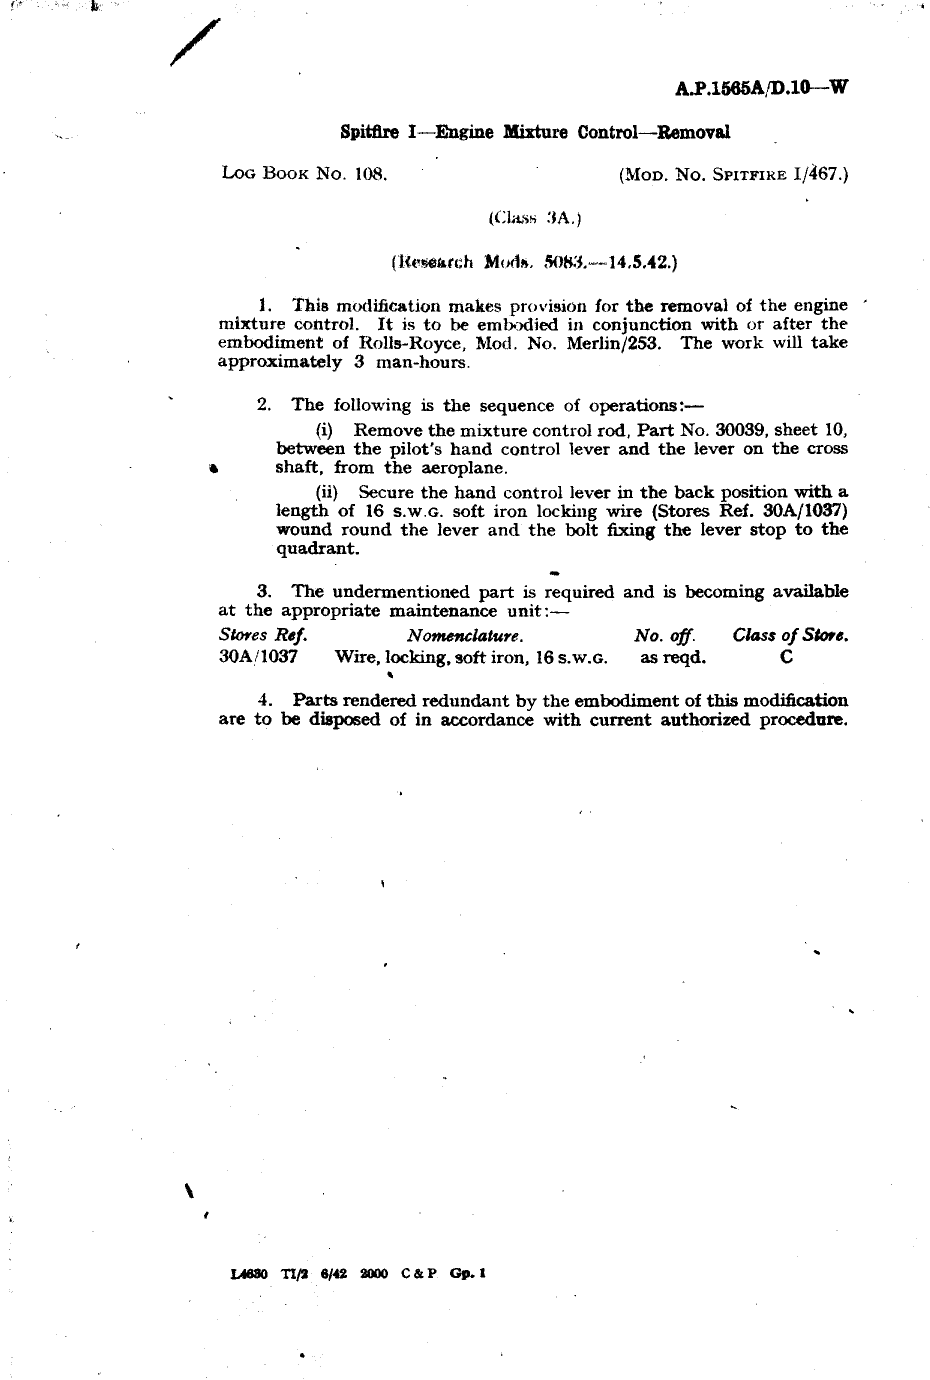 Sample page 1 from AirCorps Library document: Spitfire I Engine Mixture Control Removal